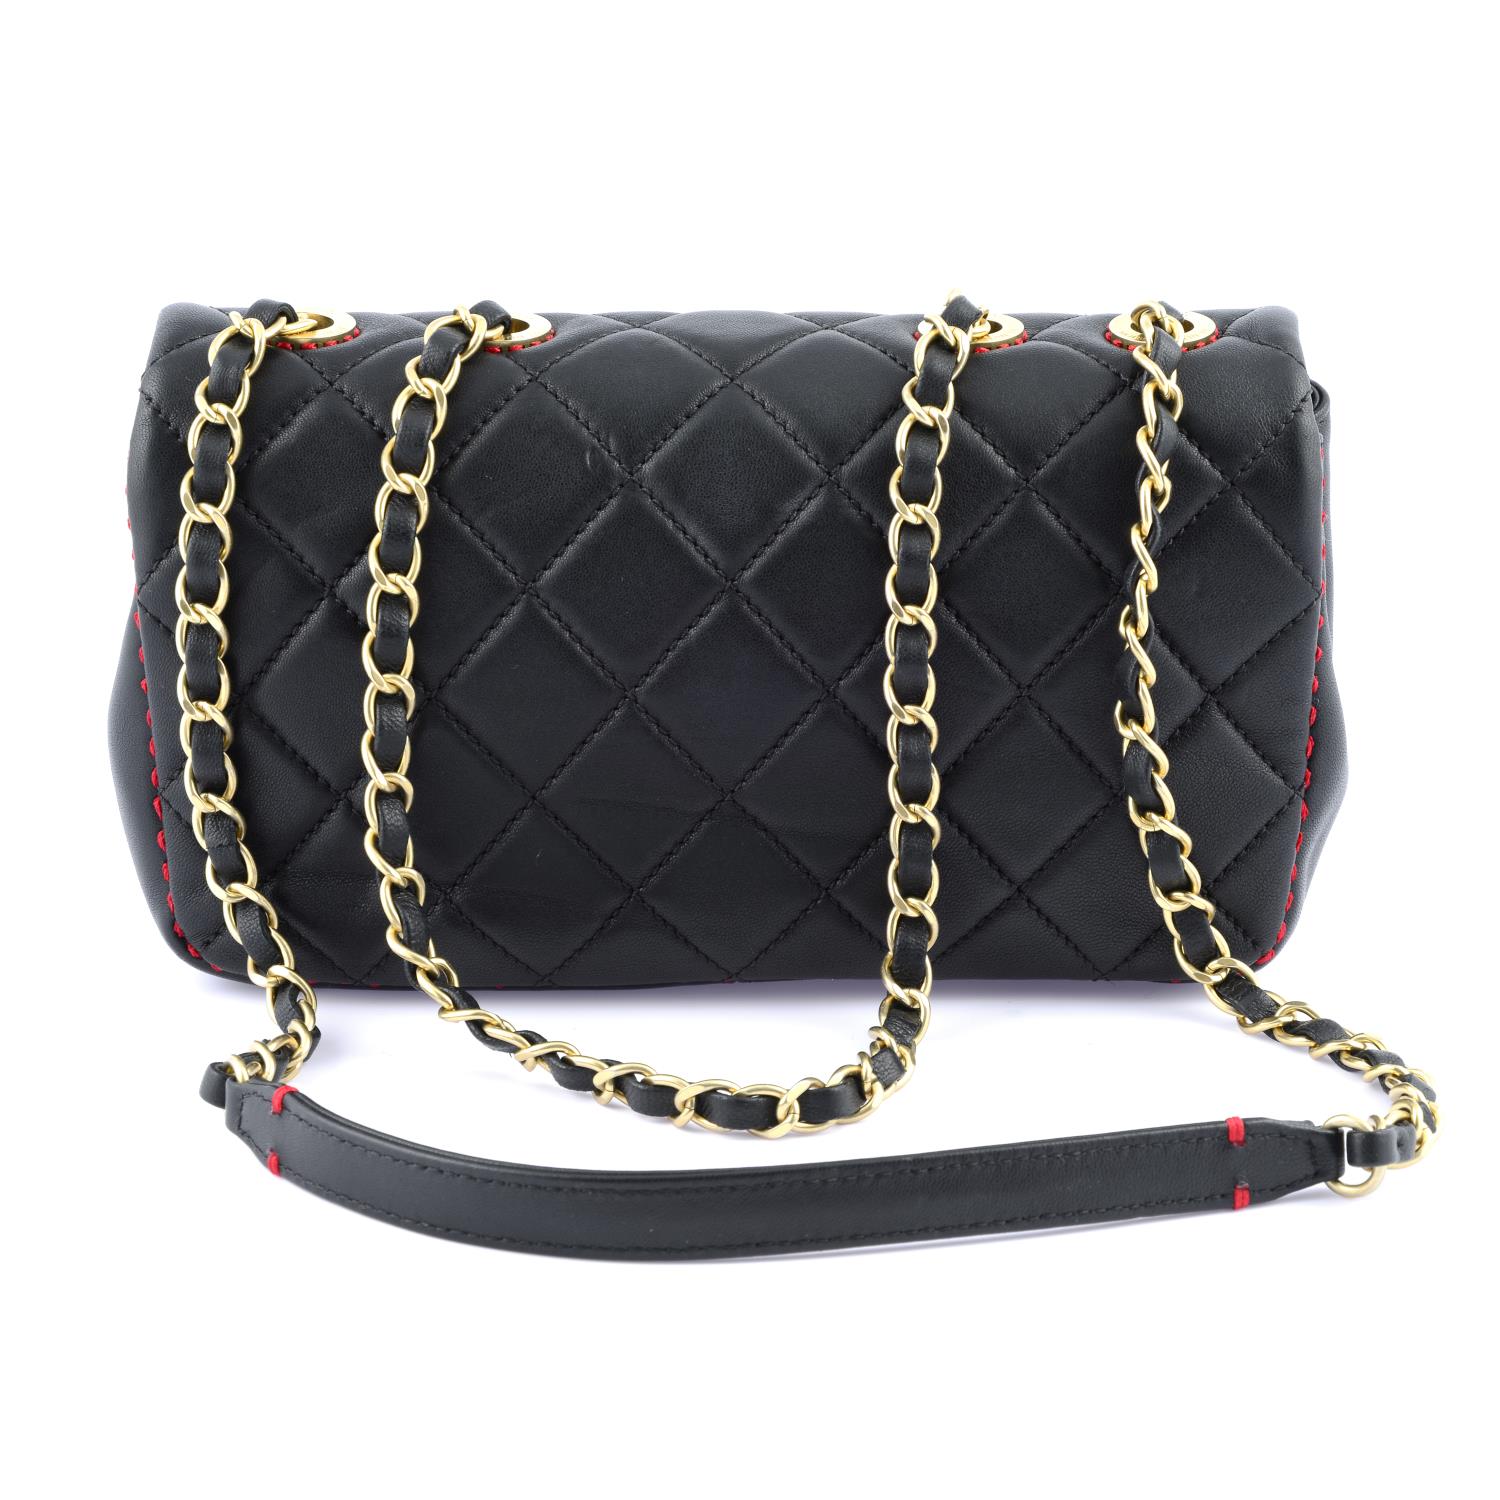 CHANEL - a quilted Small Flap handbag. - Image 2 of 4